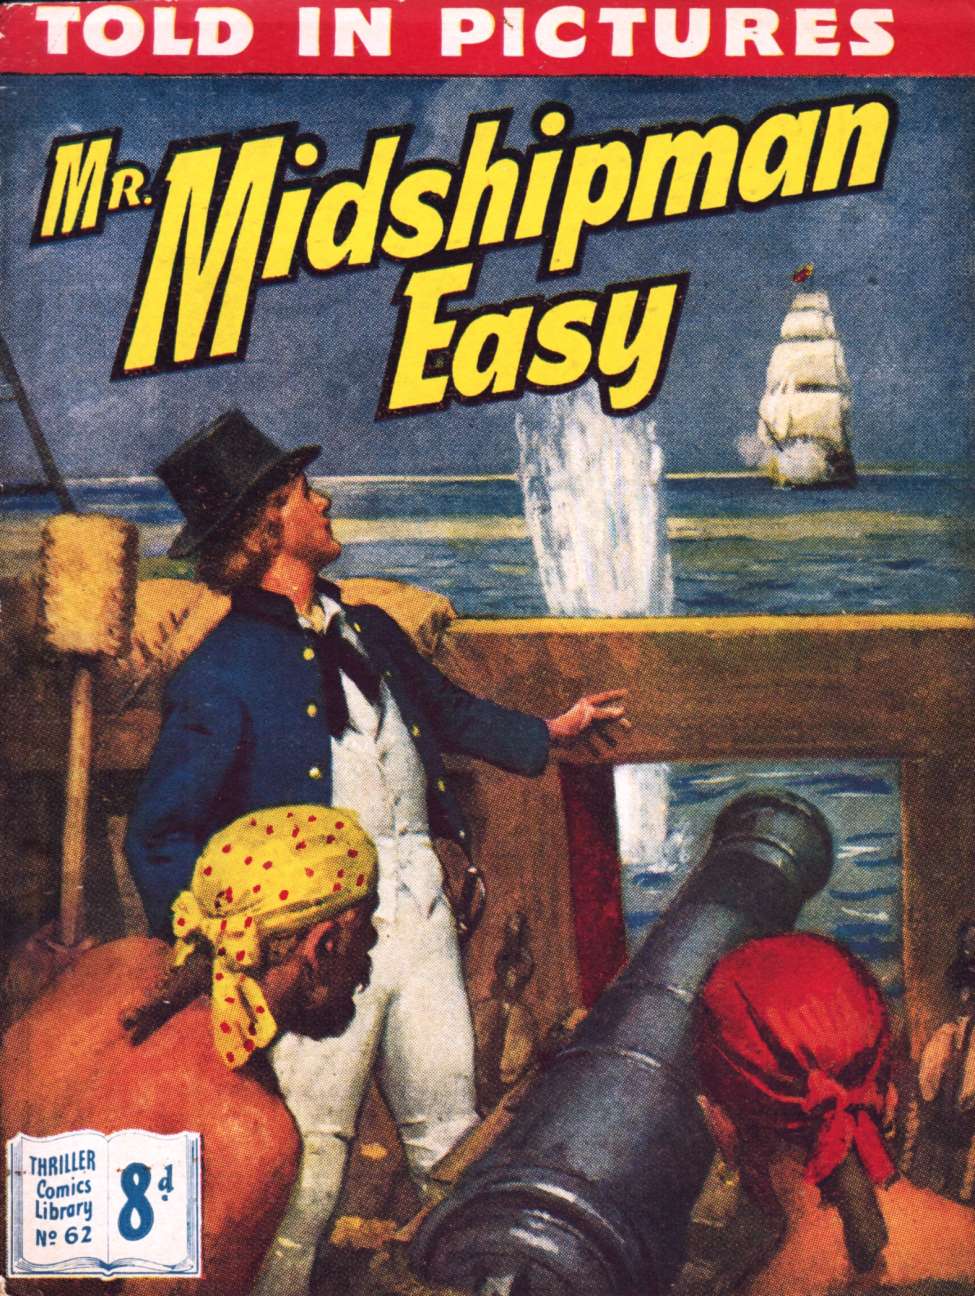 Book Cover For Thriller Comics Library 62 - Mr. Midshipman Easy